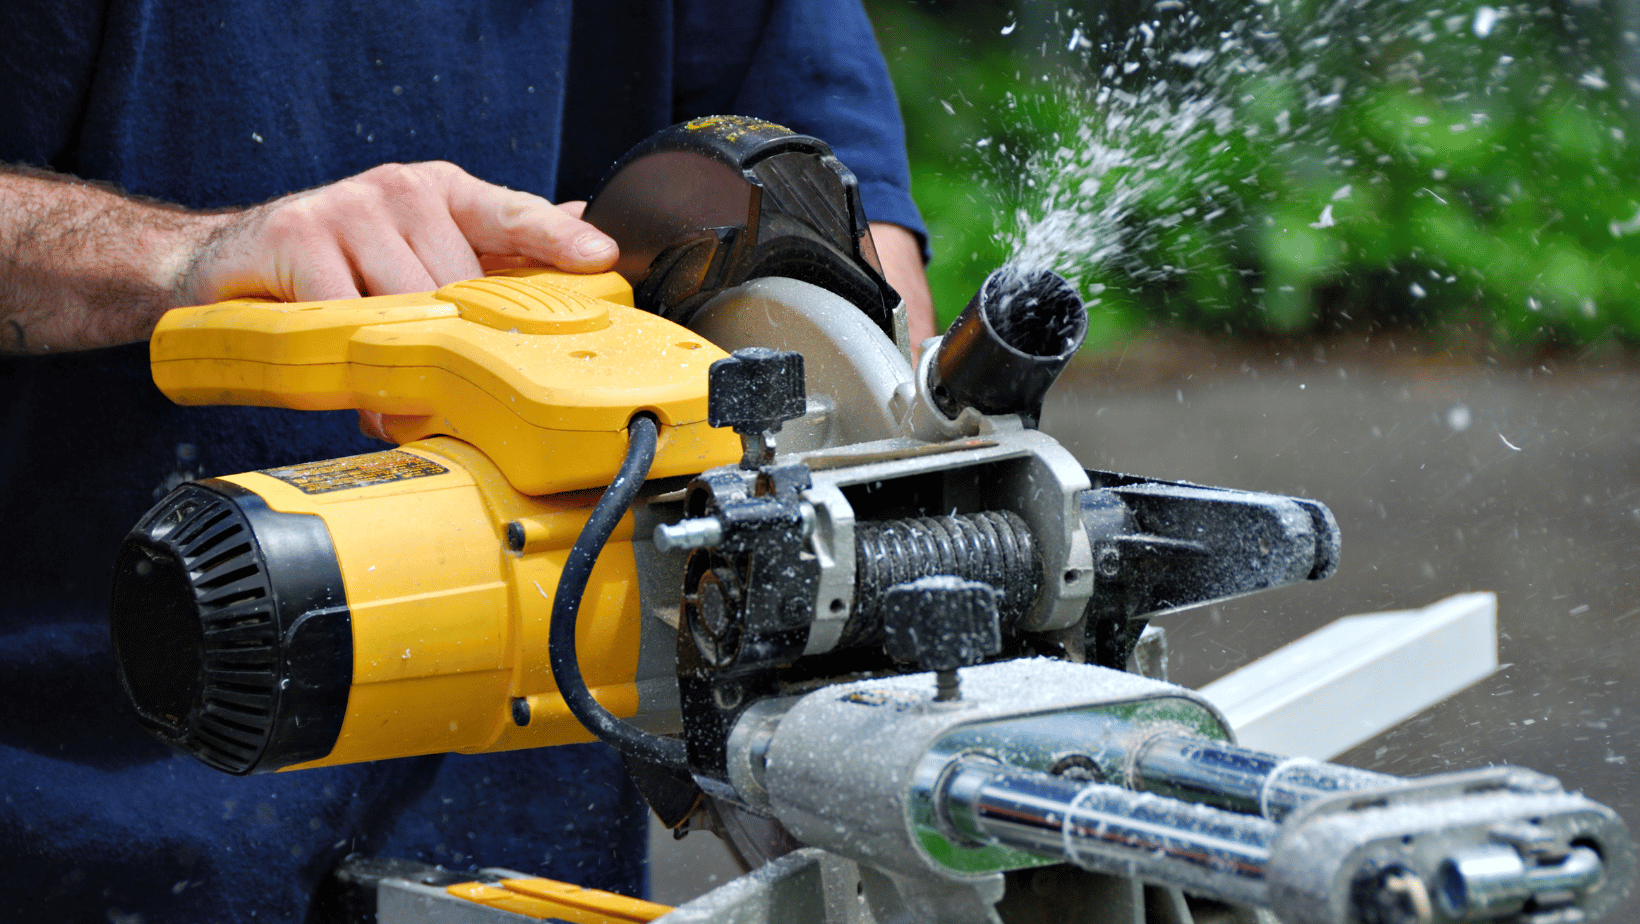 How to Choose the Best Miter Saw for Dust Collection